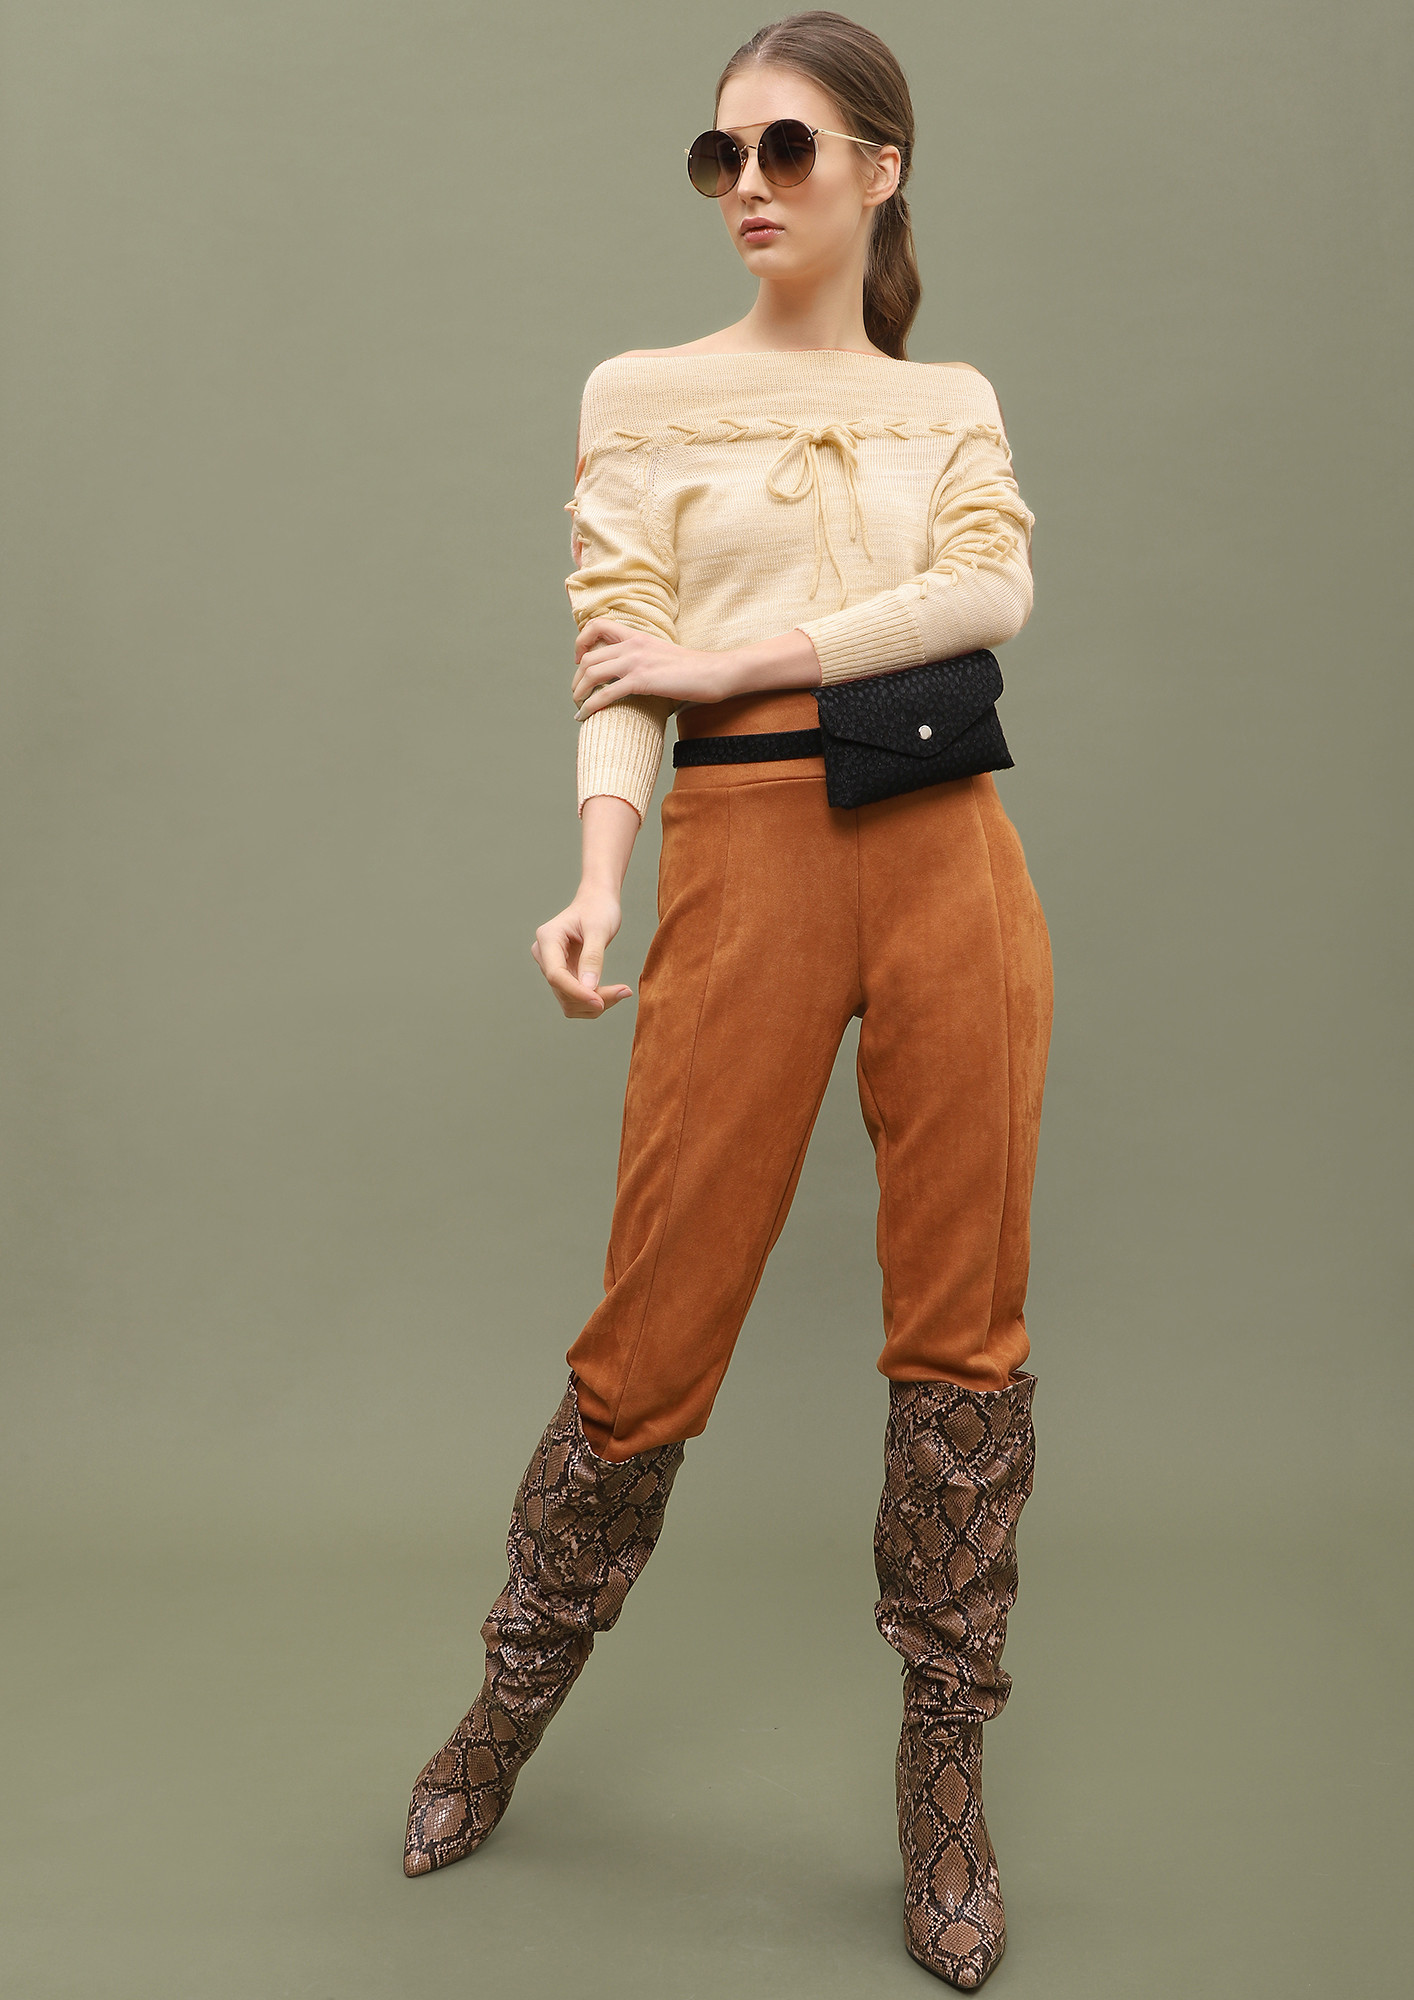 HOT CHOCOLATE AND COLD NIGHTS  BEIGE CROPPED JUMPER